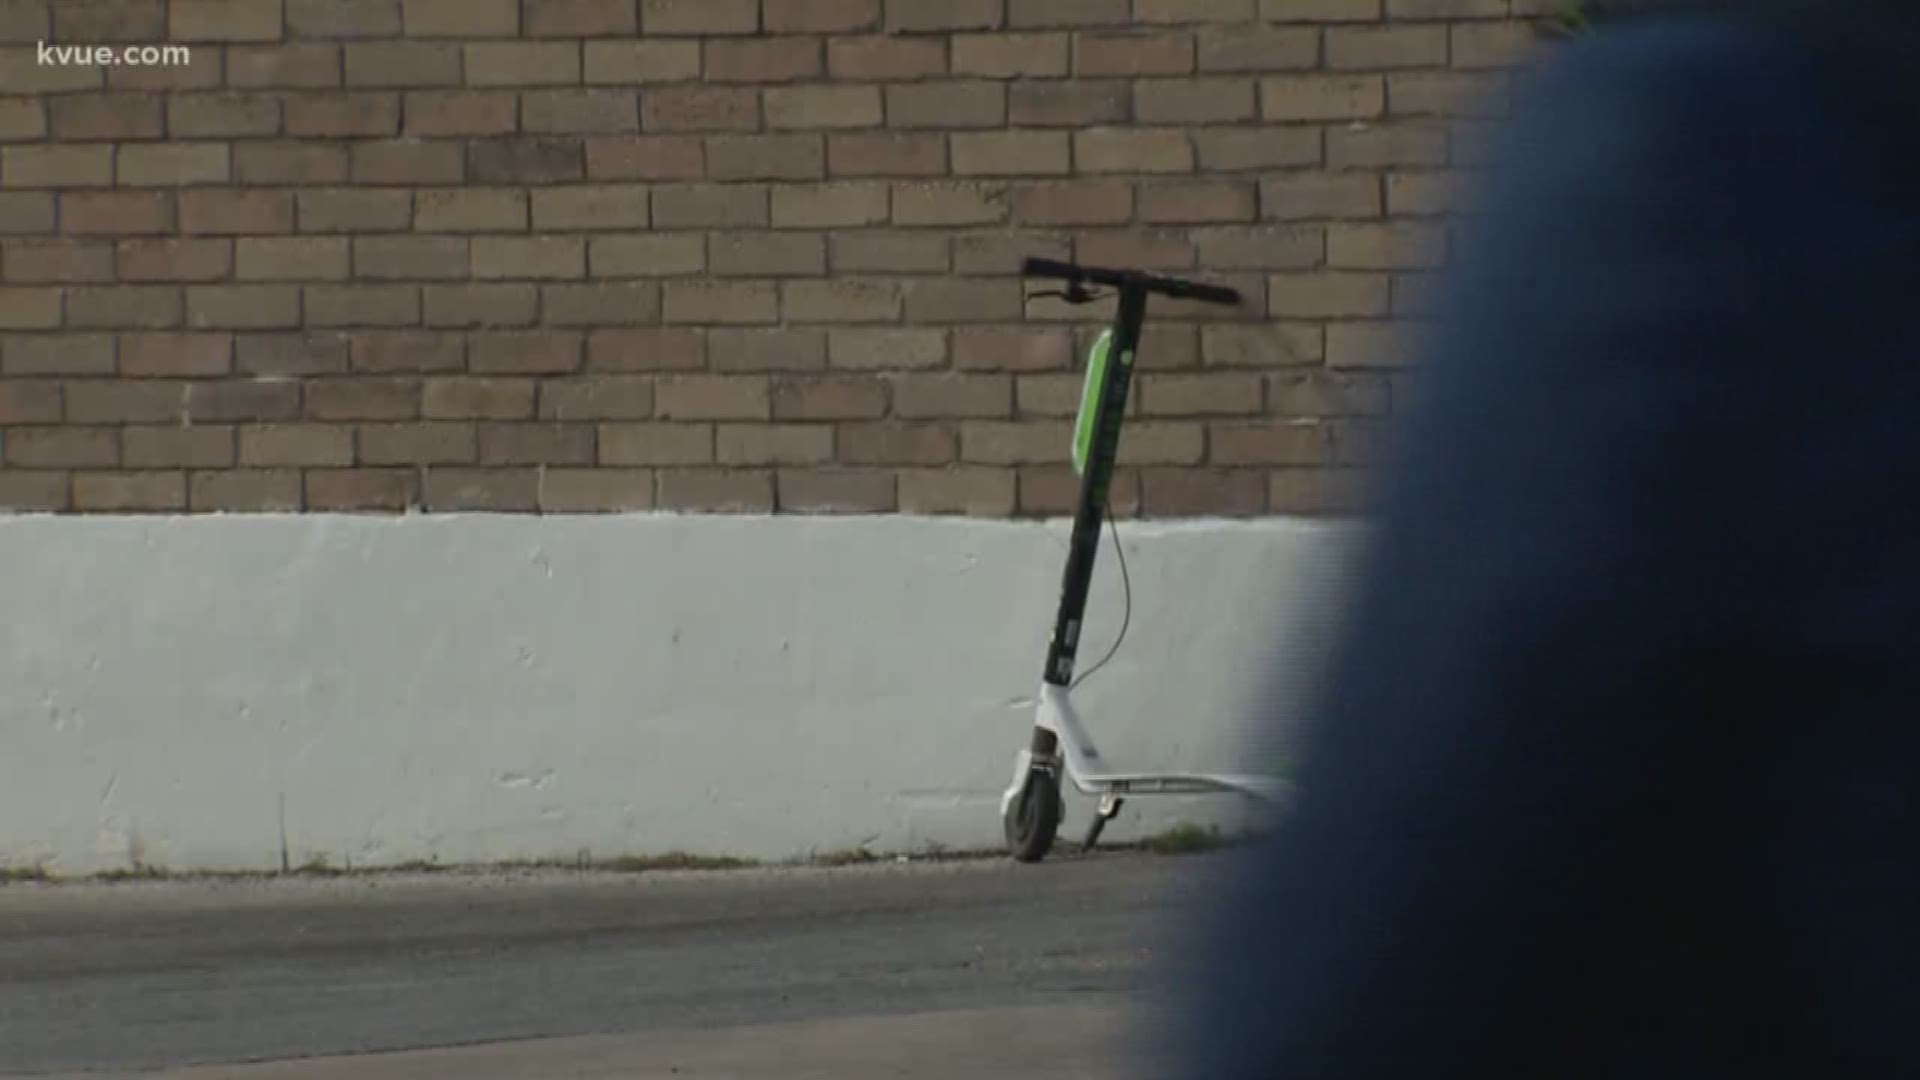 University of Texas imposing $150 impound fee for scooters